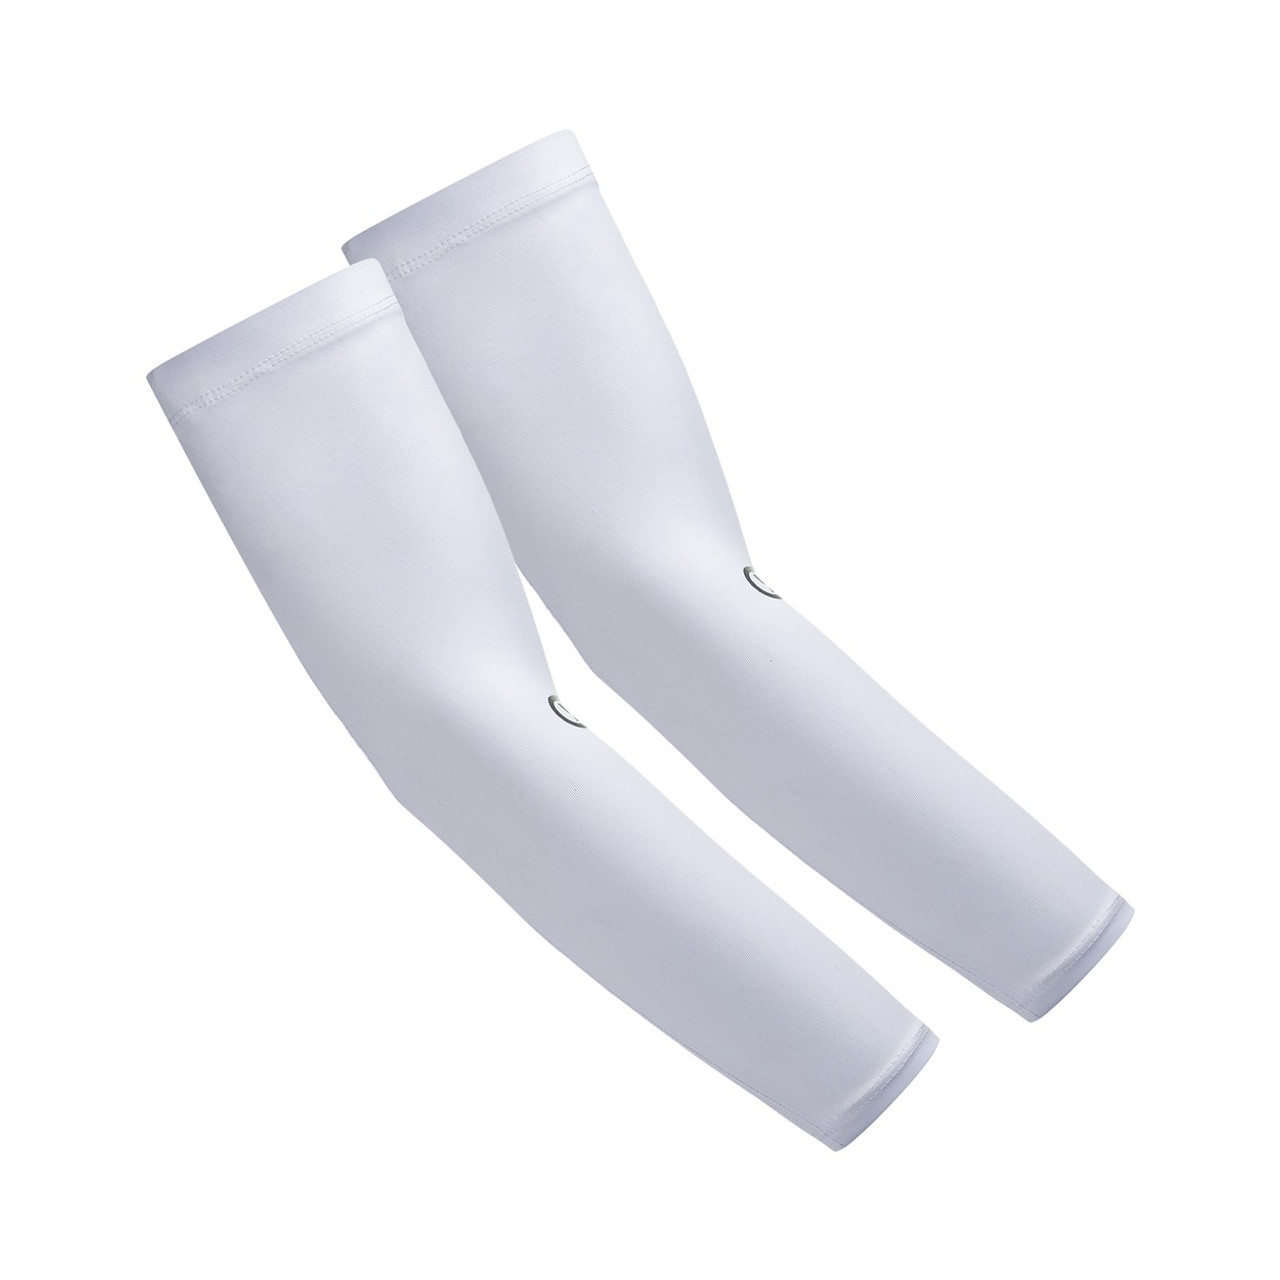 ULTRA-STICK FULL ARM-SLEEVE ADULT - Sports Contact